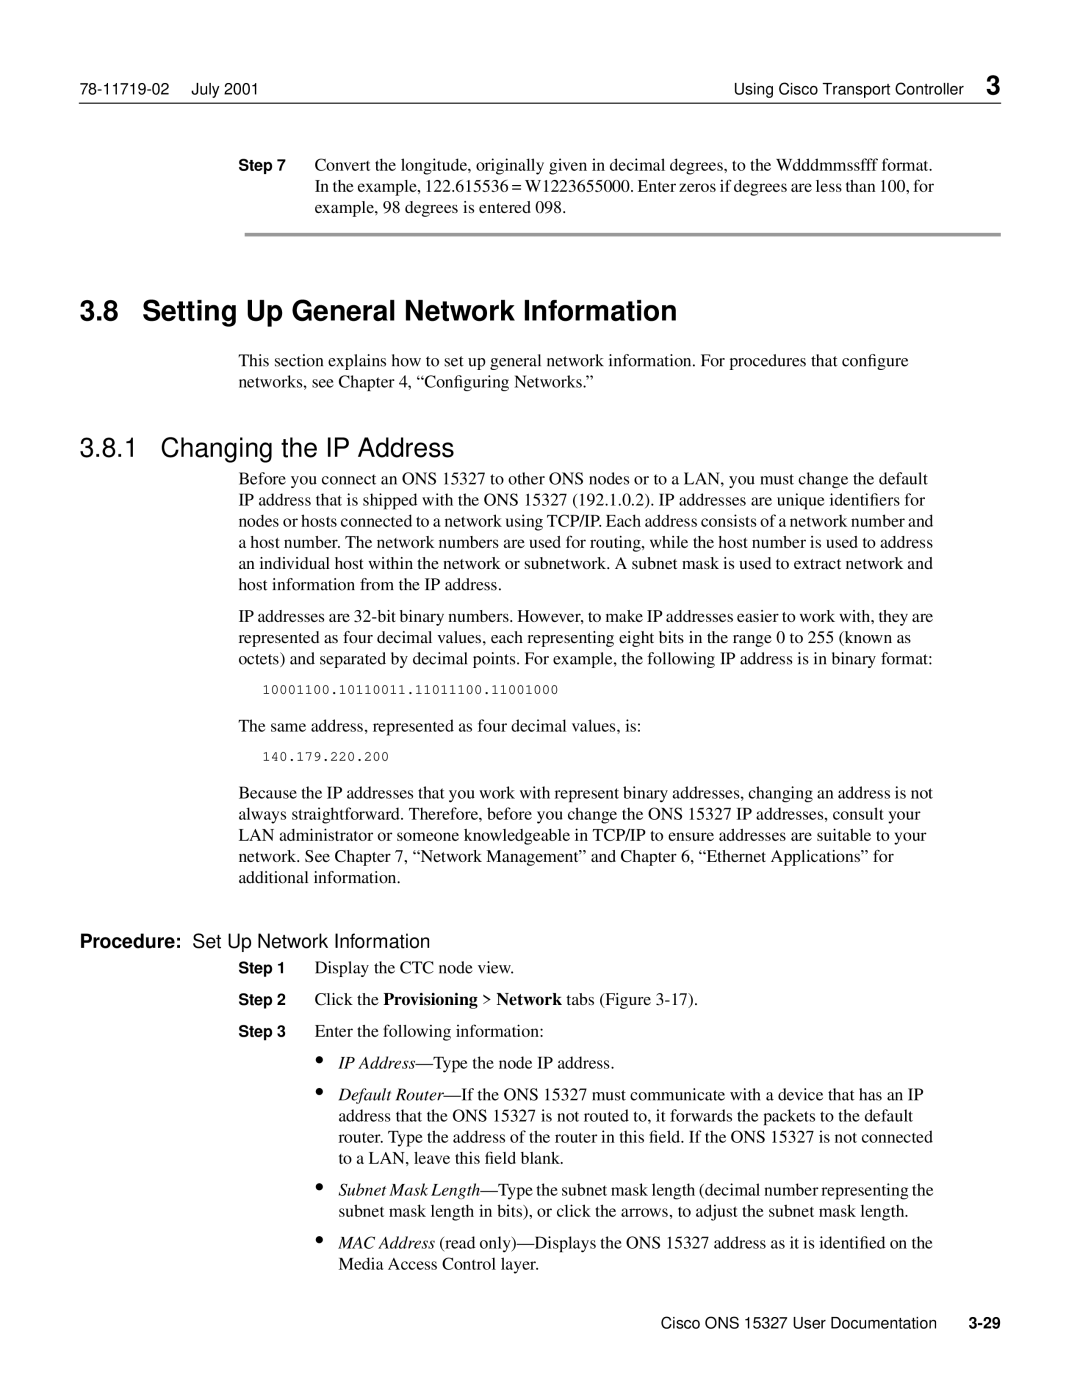 Cisco Systems ONS 15327 manual Setting Up General Network Information, Changing the IP Address 